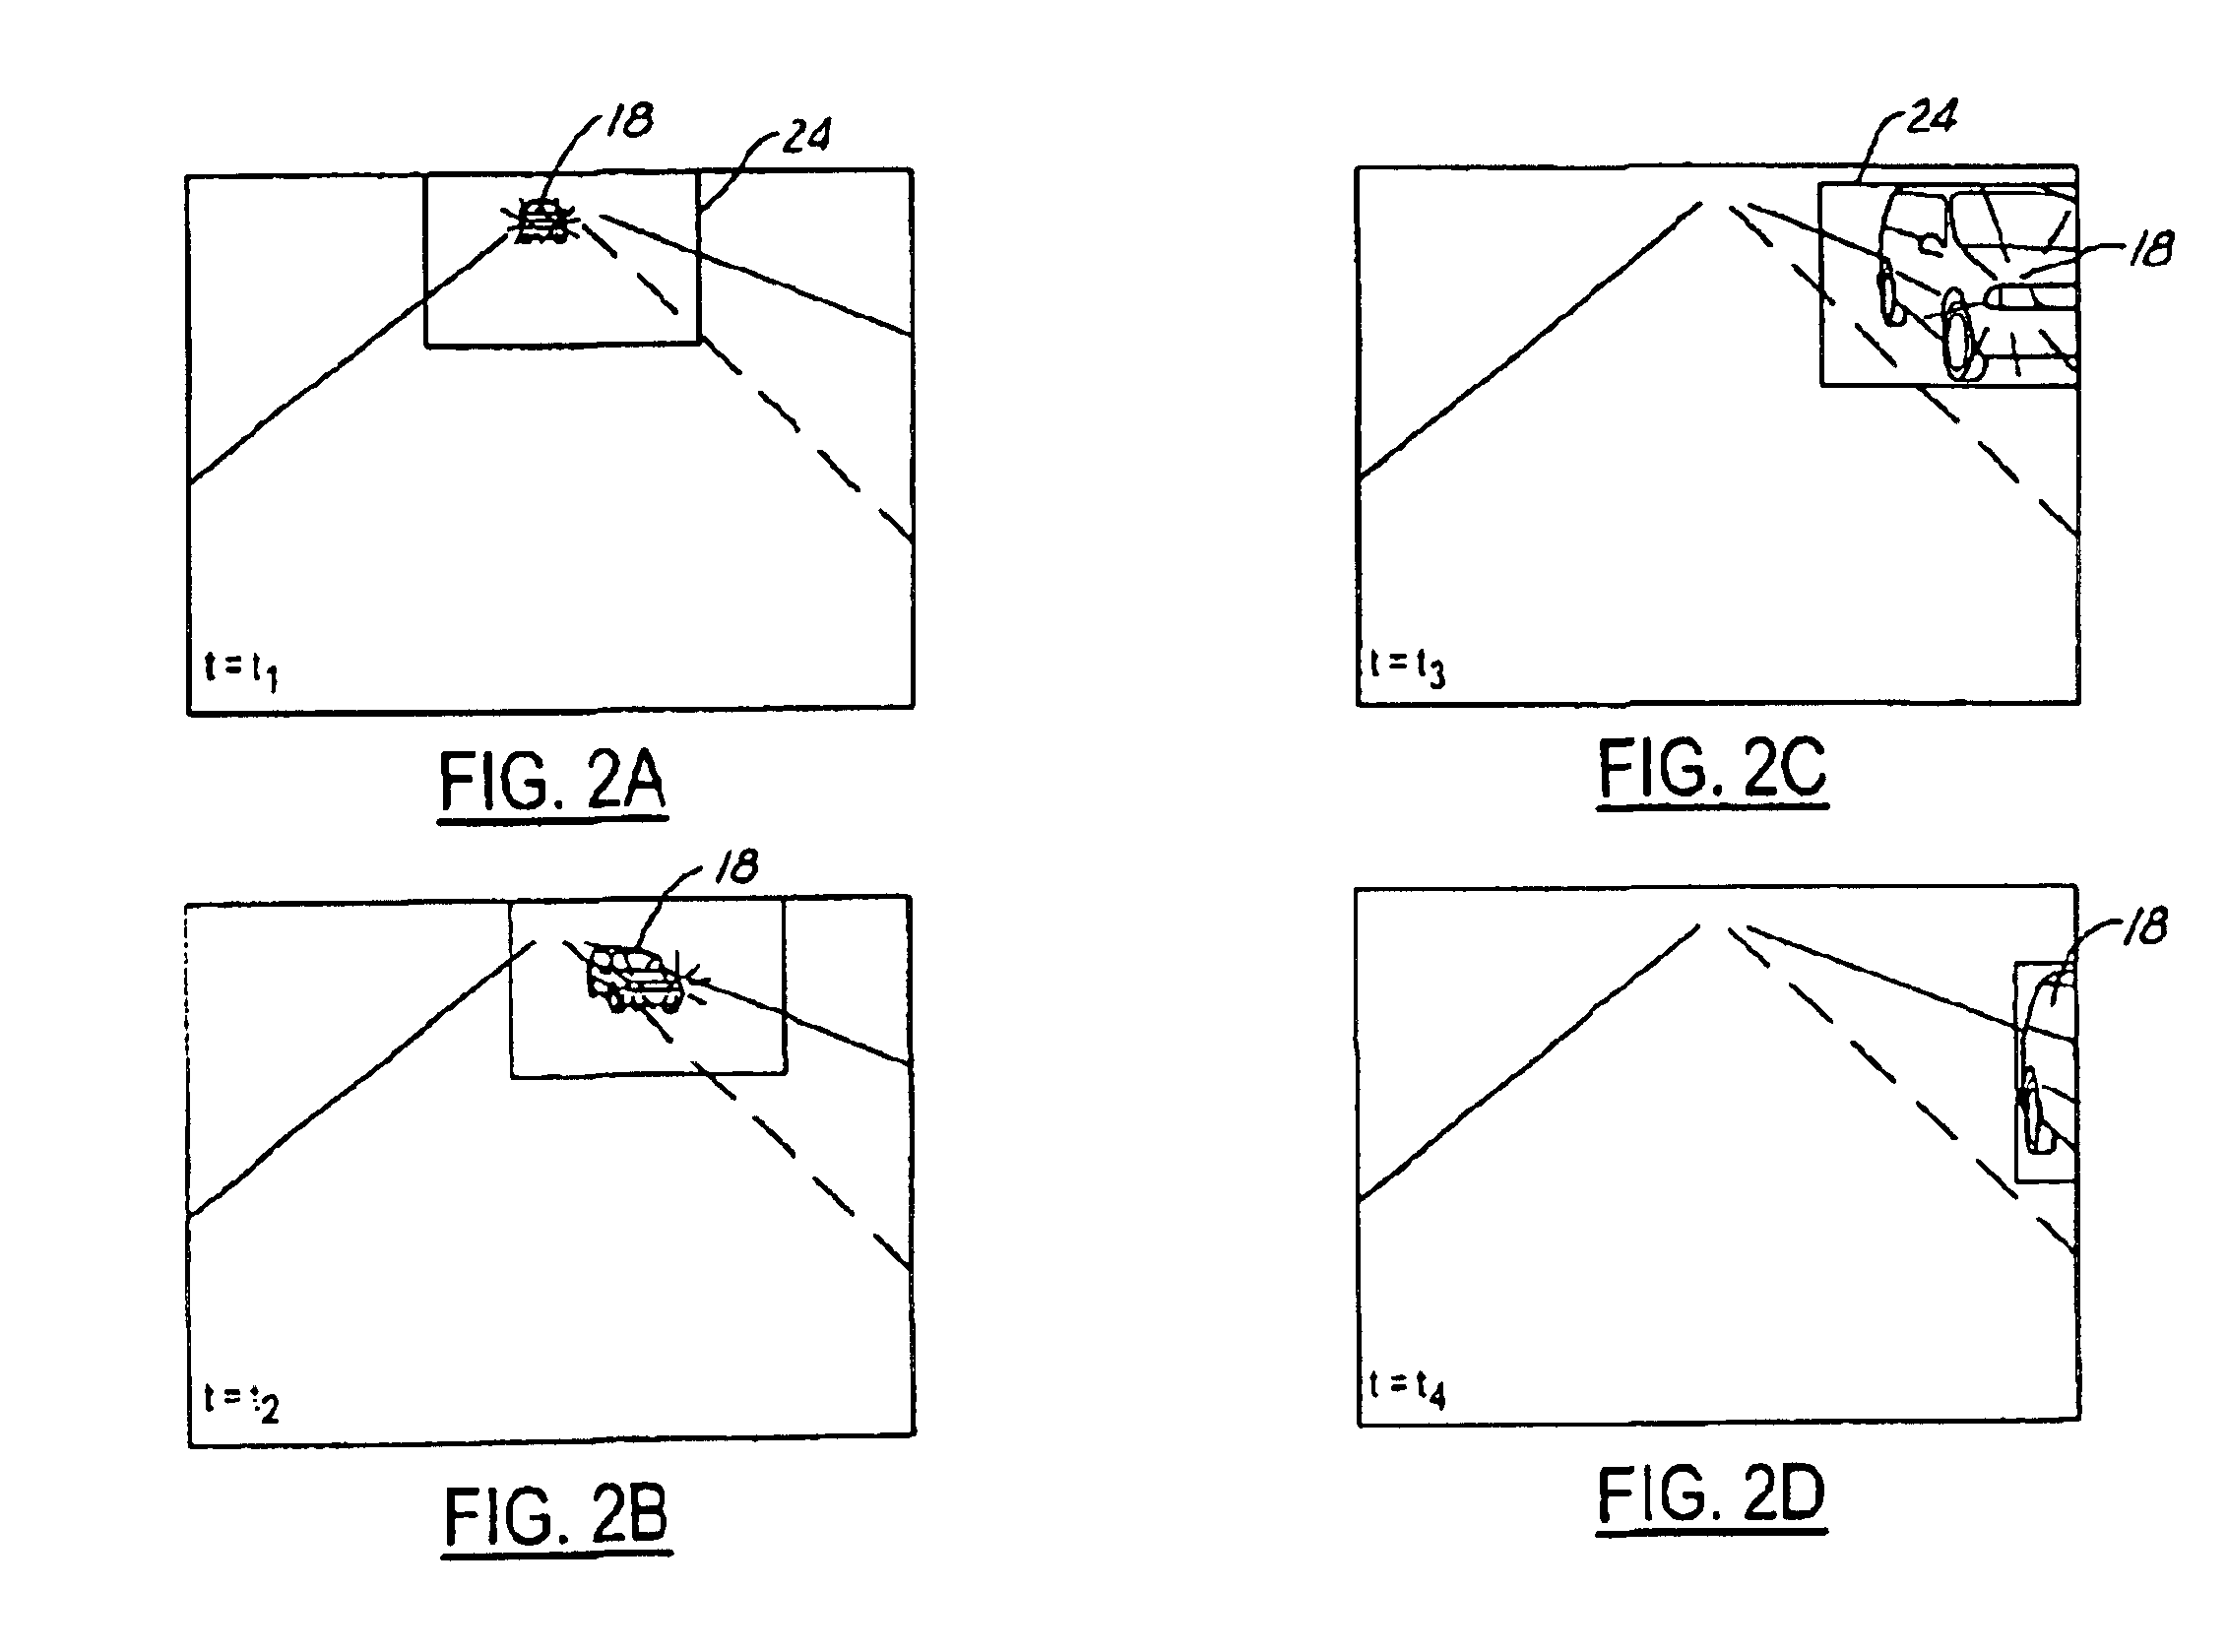 Blind spot warning system for an automotive vehicle